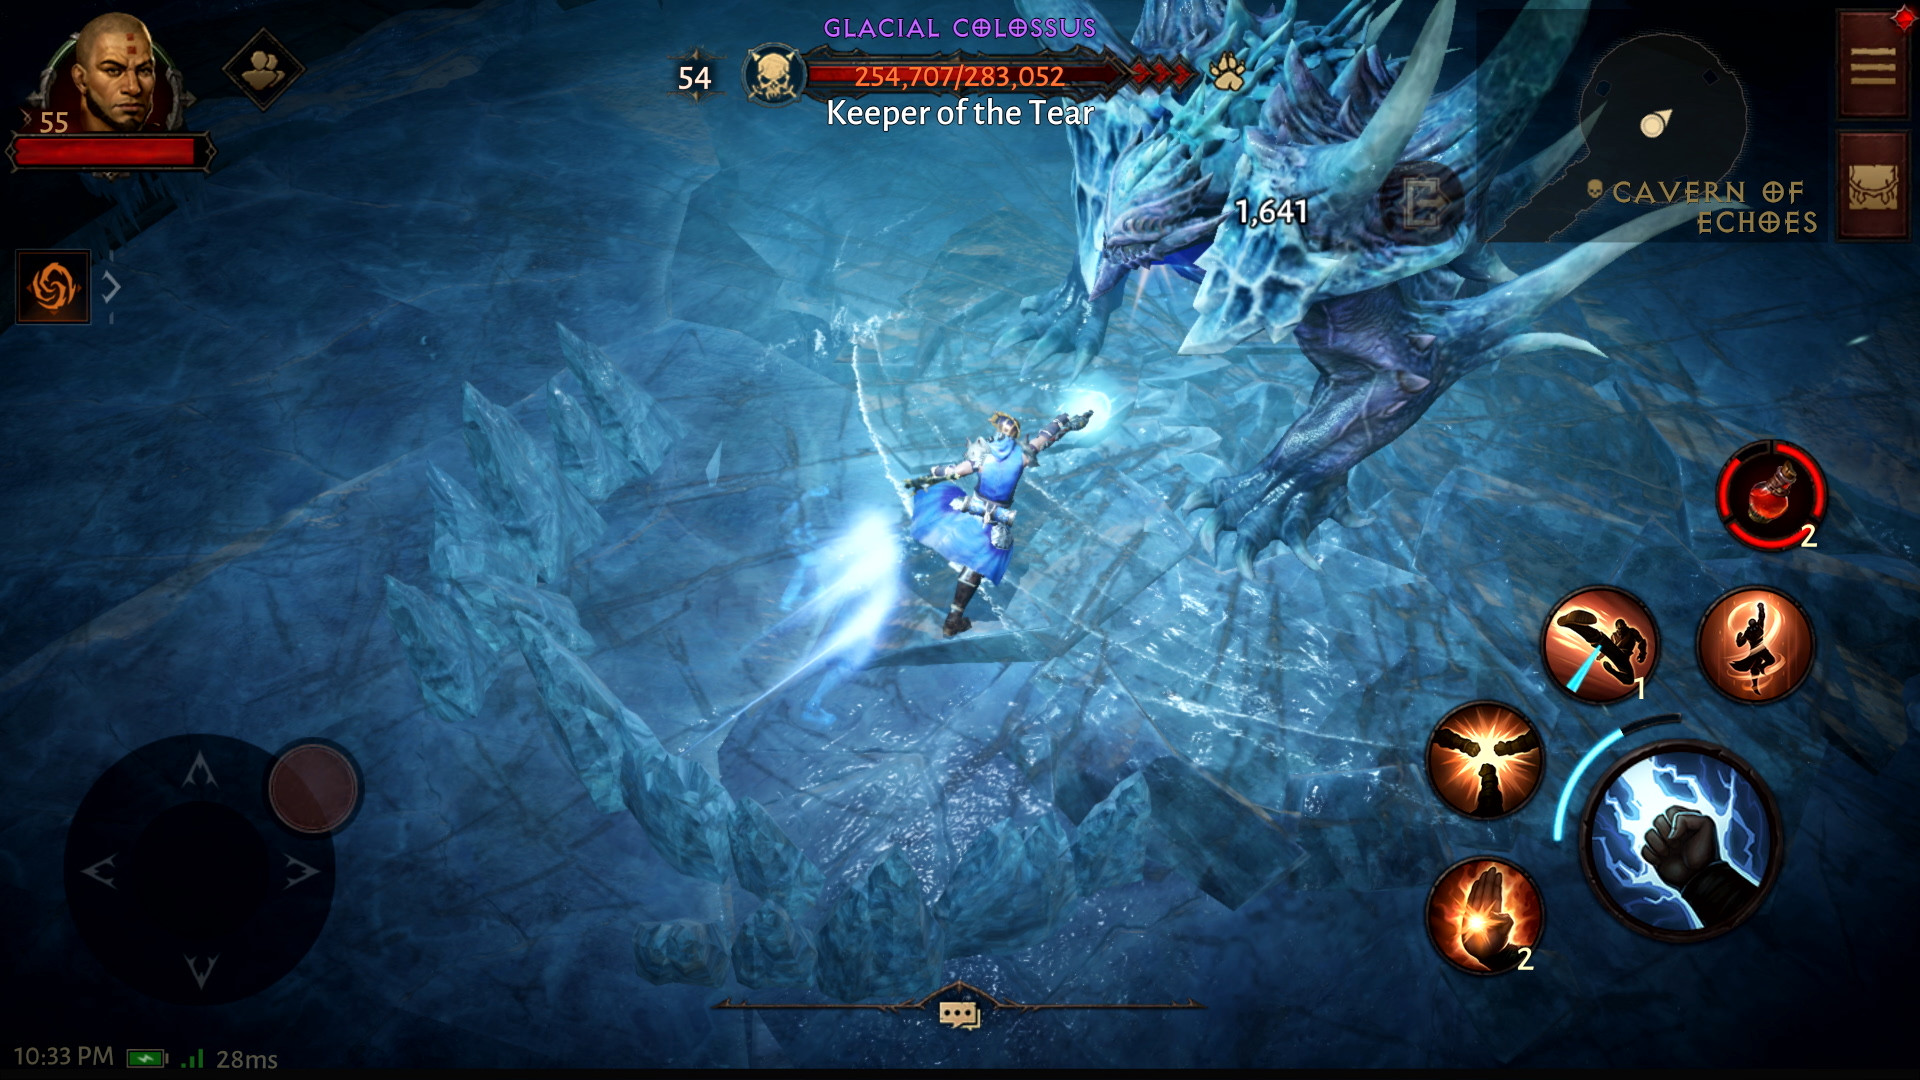 Cavern of Echoes Glacial Colossus fight